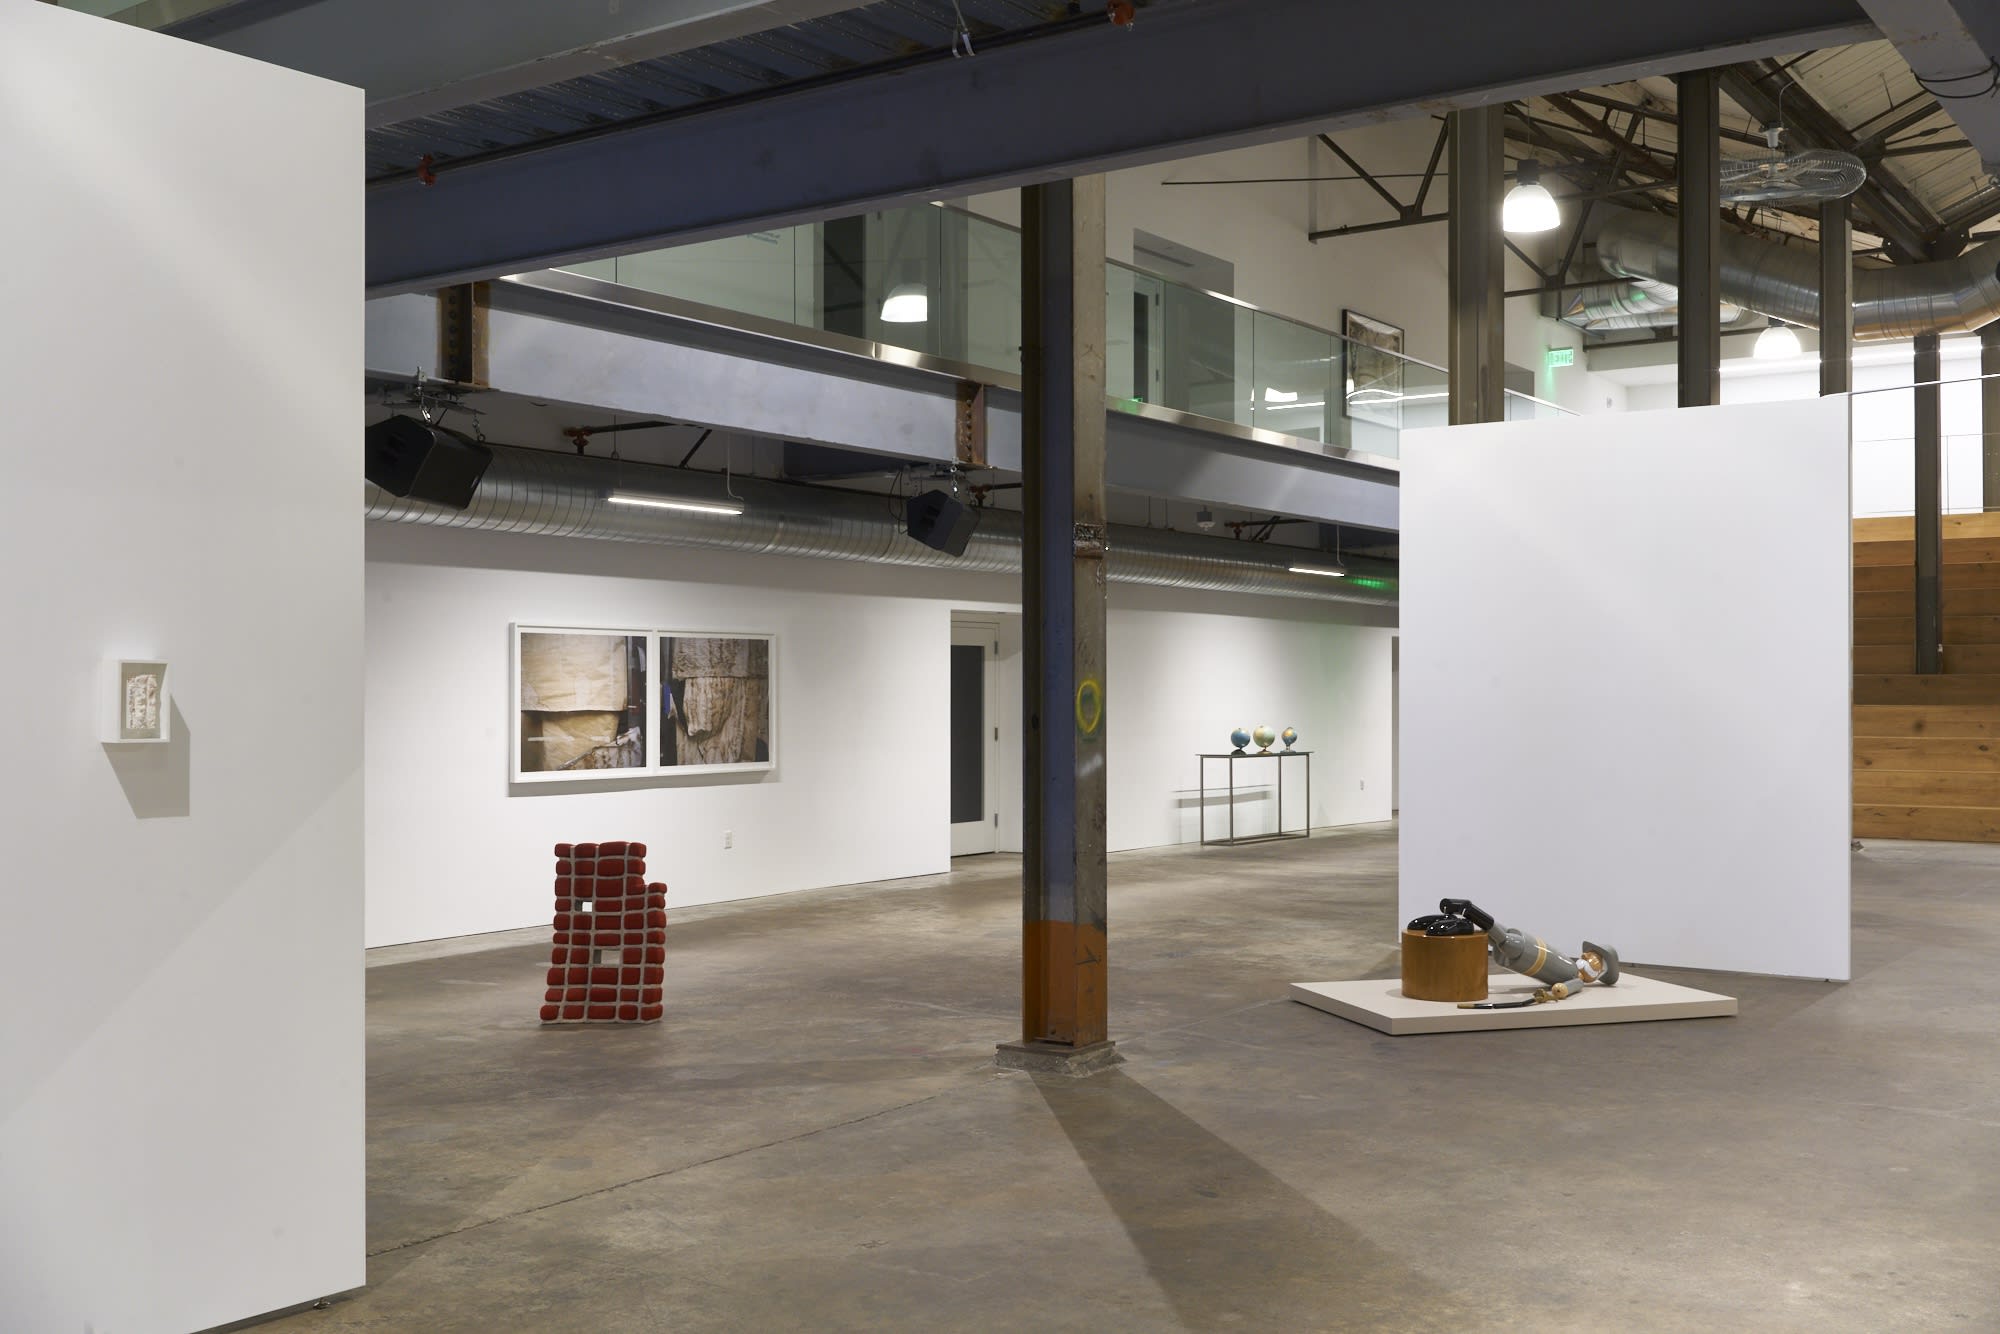 Hashimoto Contemporary's new gallery space at Minnesota Street project